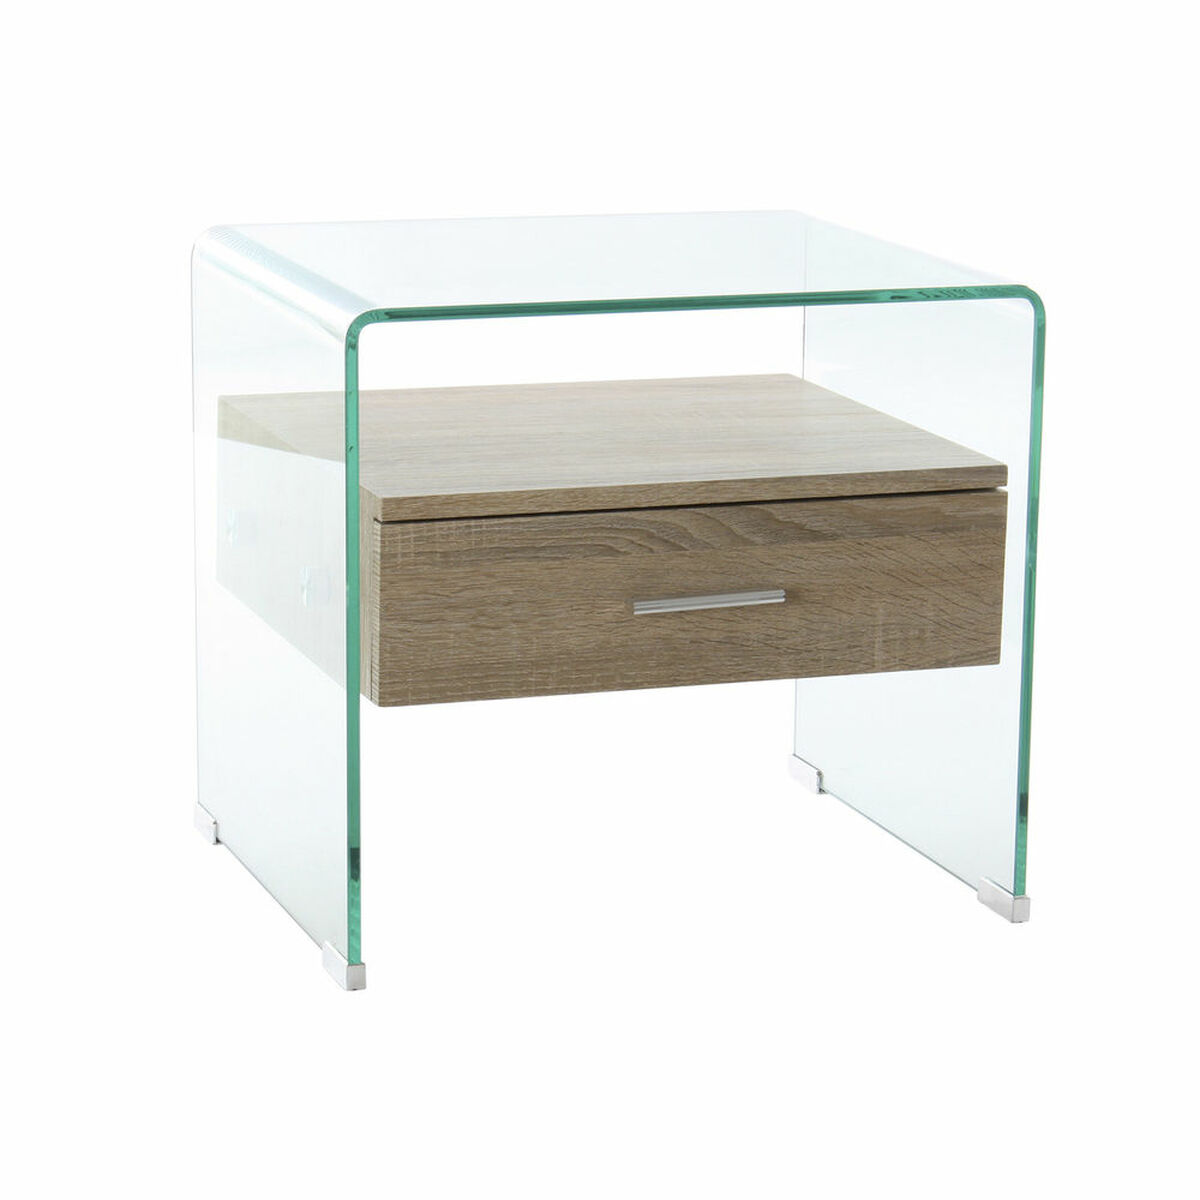 Nightstand DKD Home Decor 8424001754793 50 x 40 x 45,5 cm Crystal Natural Transparent MDF Wood